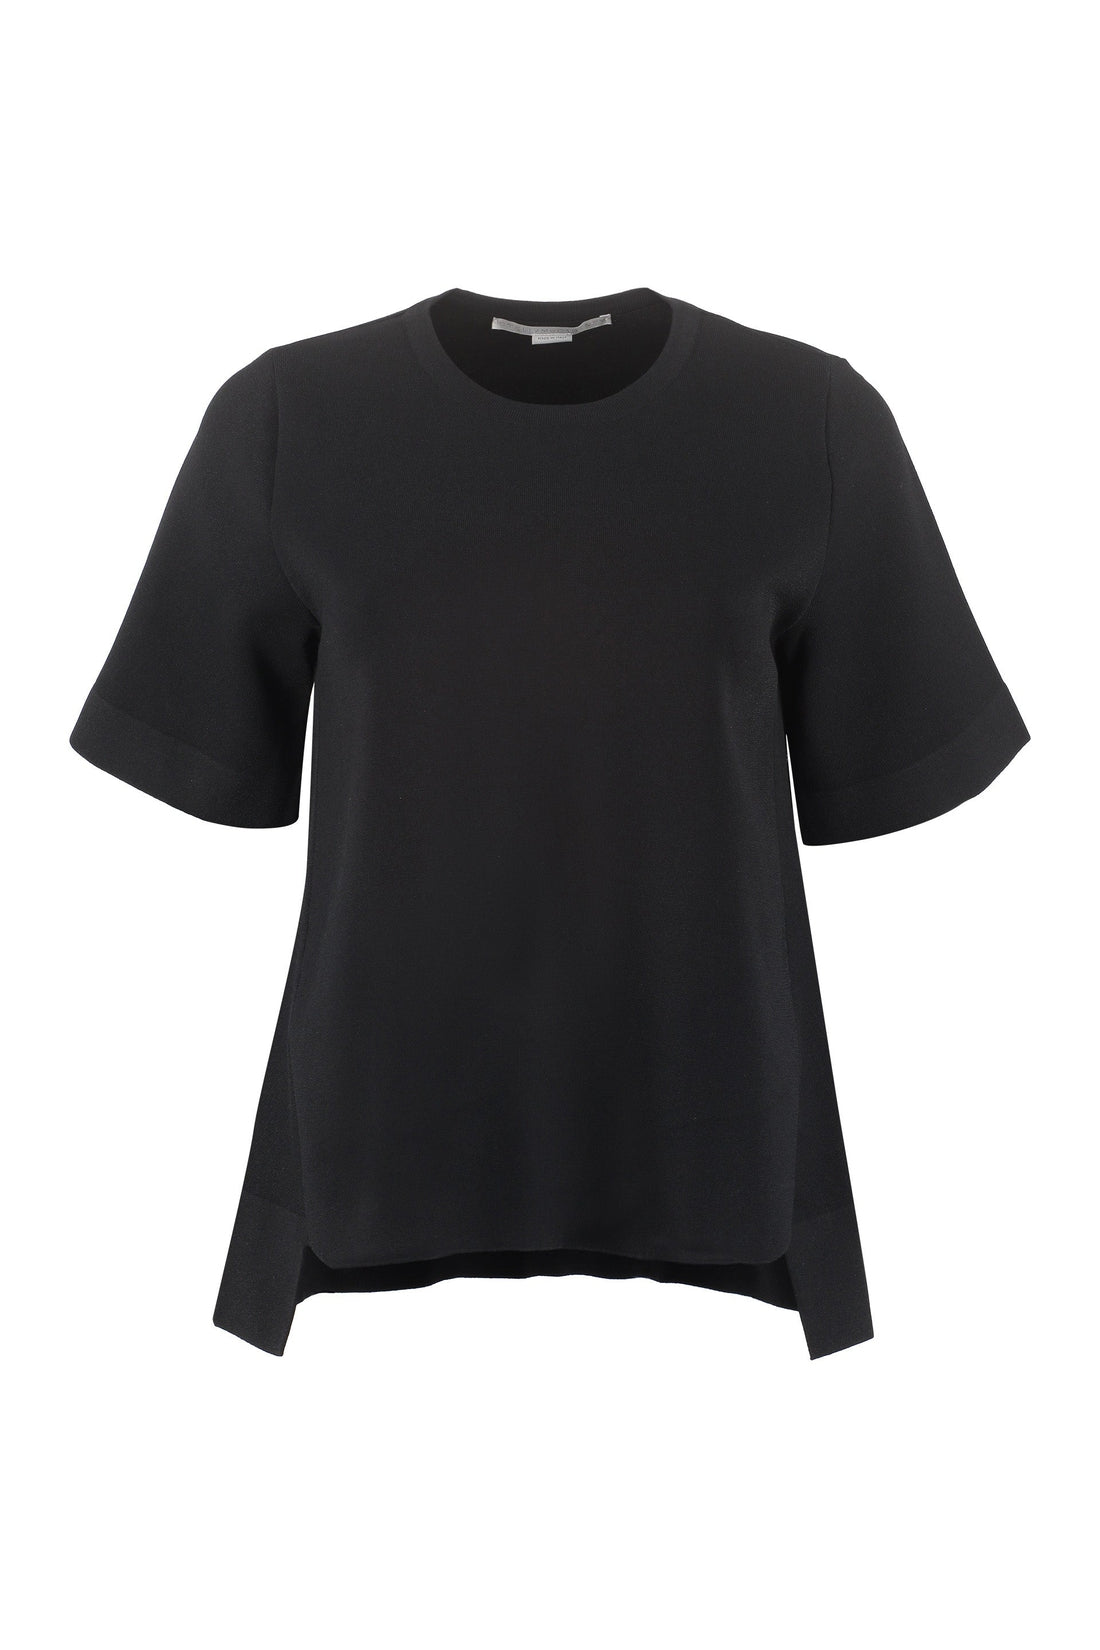 Stella McCartney-OUTLET-SALE-Knitted viscosa-blend top-ARCHIVIST